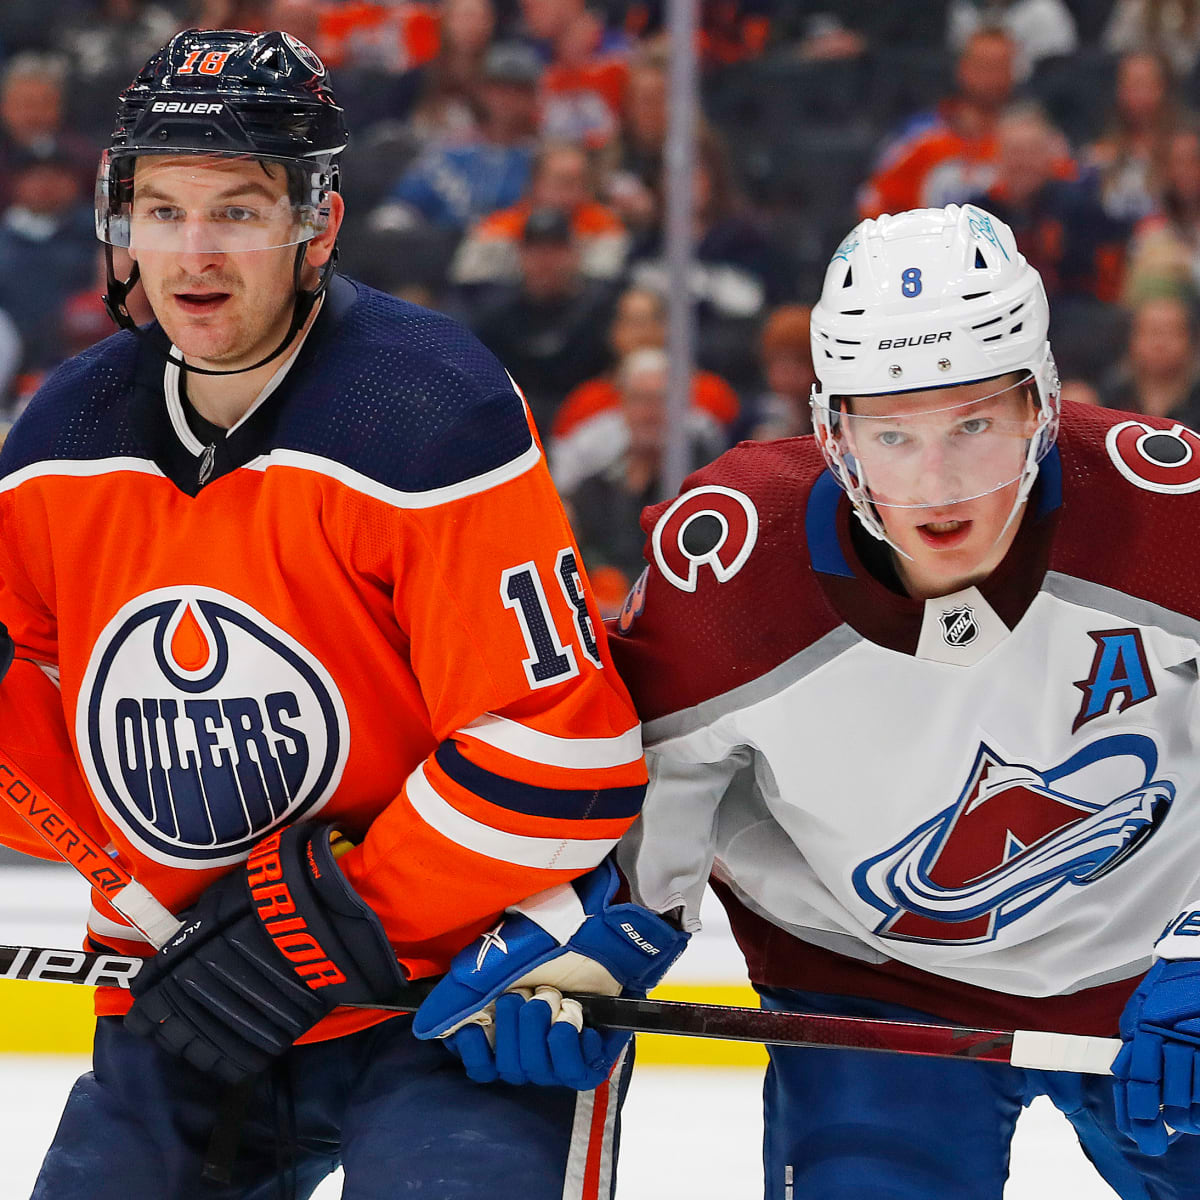 2022 NHL playoff preview: Avalanche vs. Oilers - The Athletic